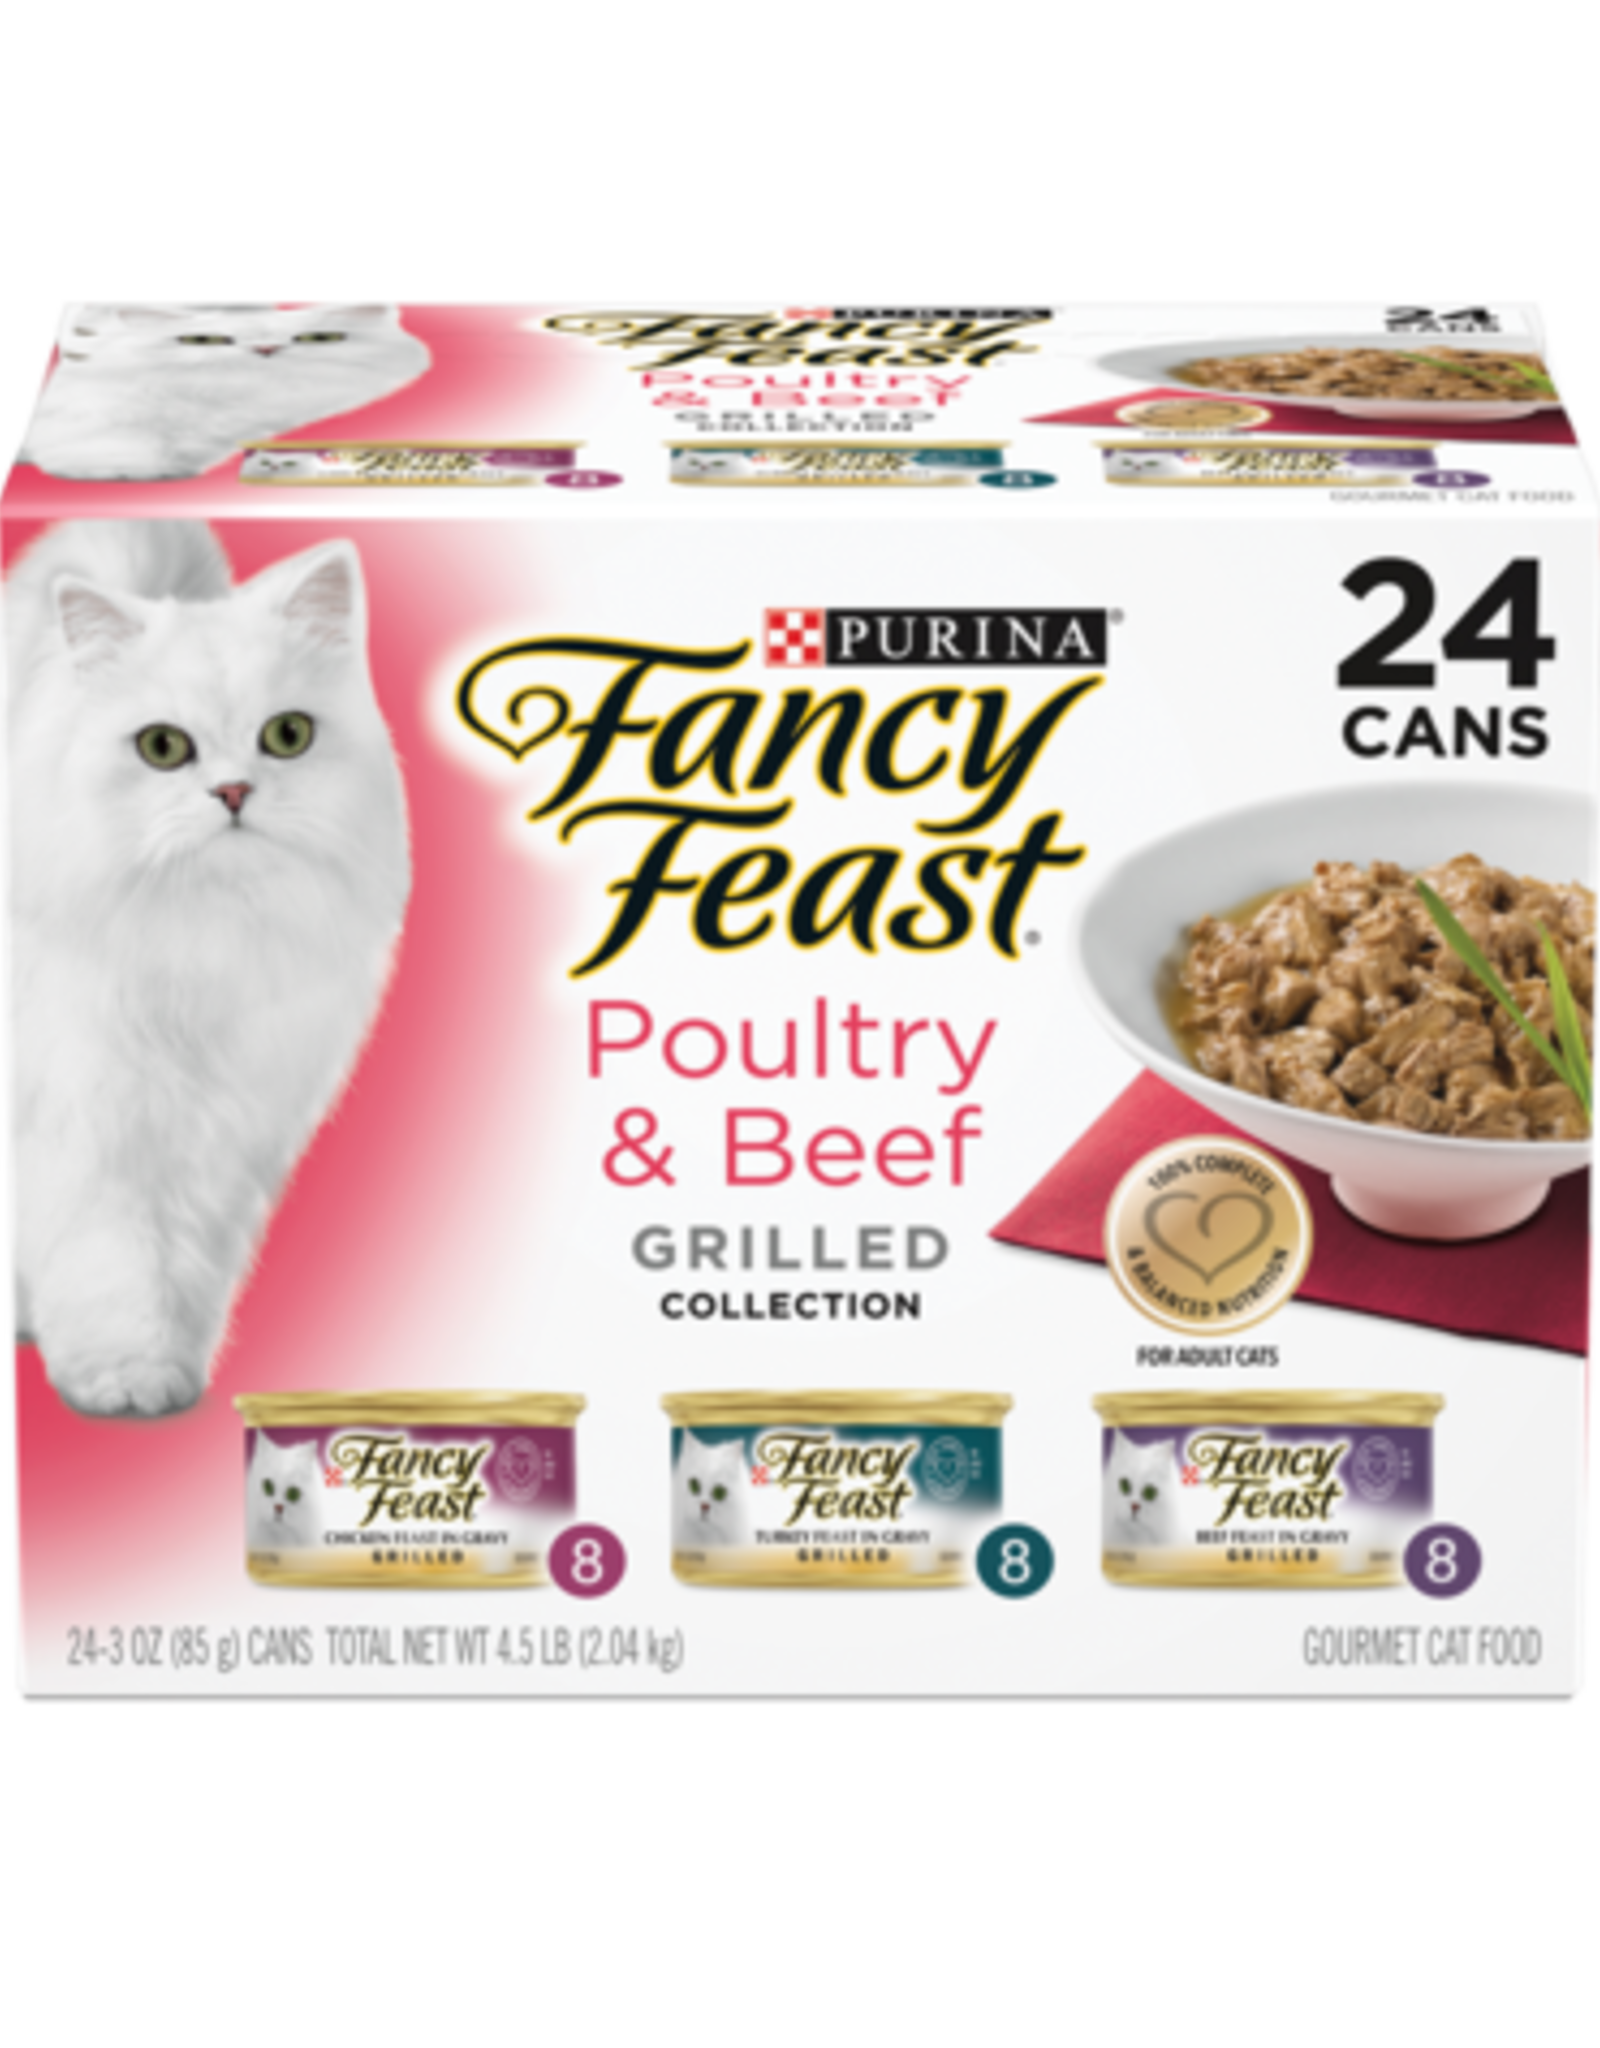 NESTLE PURINA PETCARE FANCY FEAST POULTRY & BEEF GRILLED VARIETY CANS 24 PACK